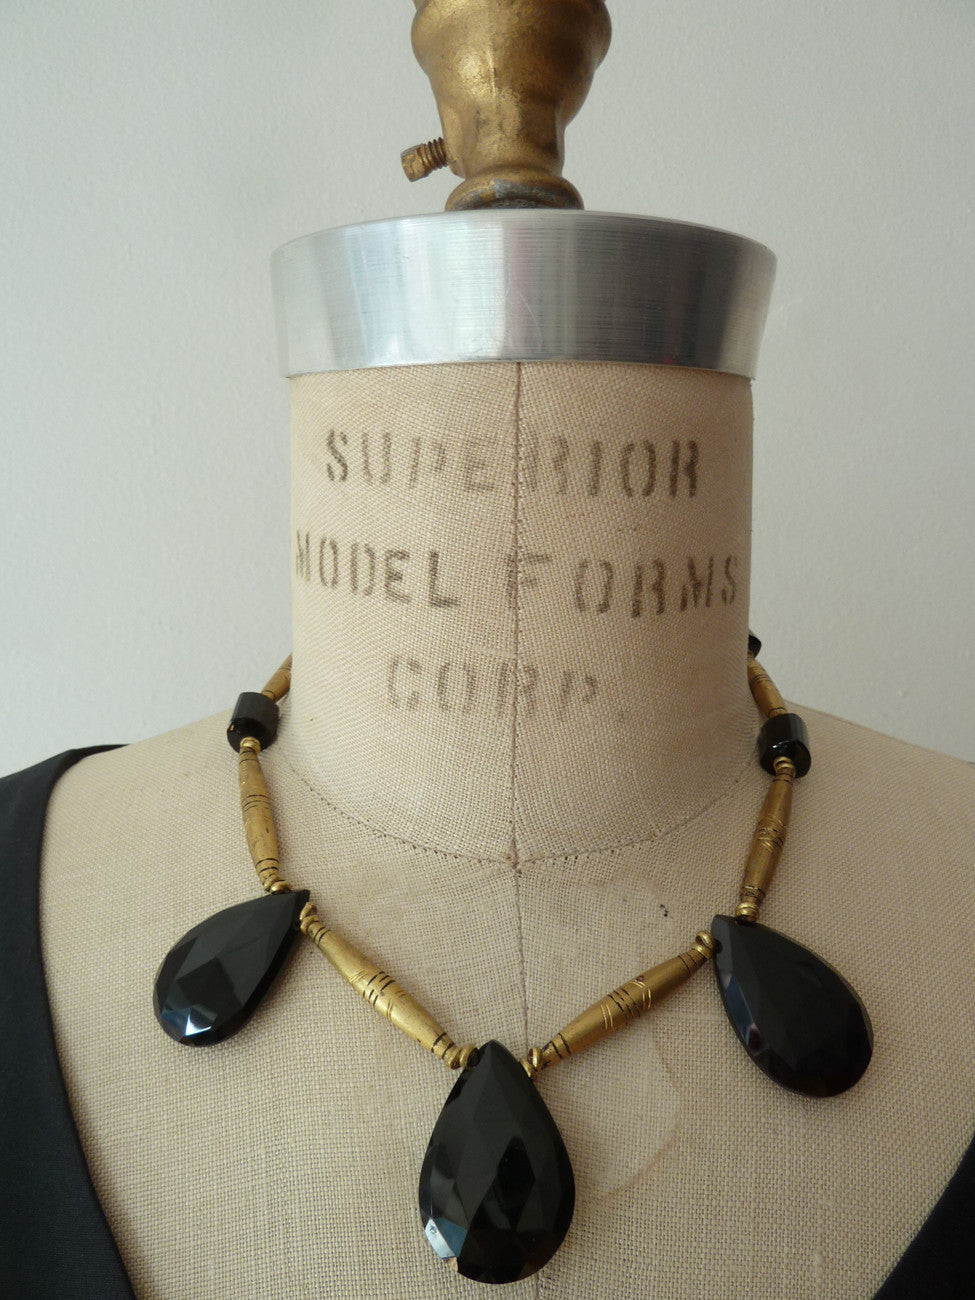 Necklace Vintage African Brass And Faceted Onyx